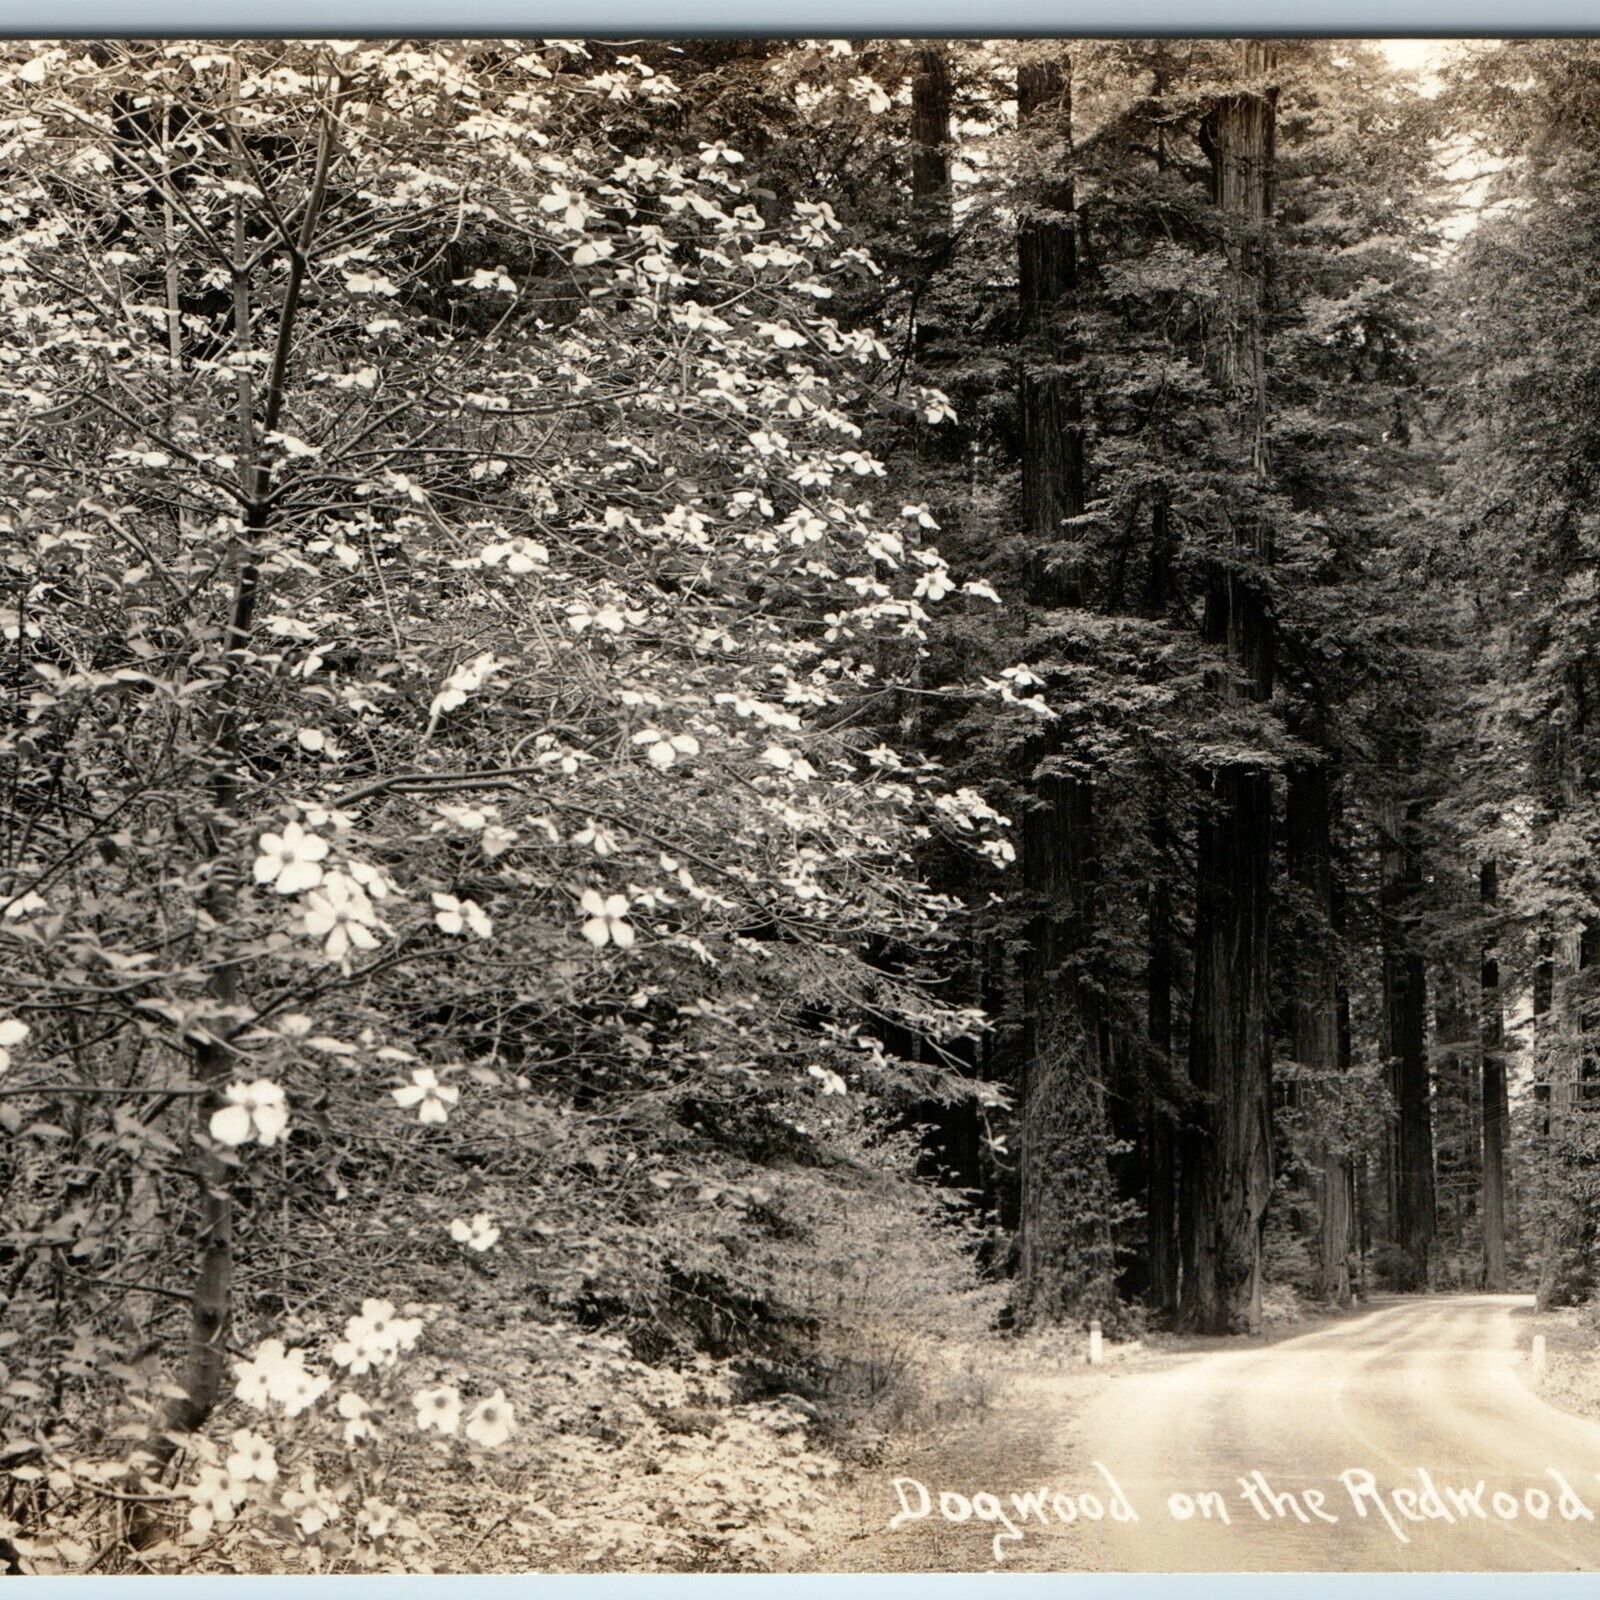 c1930s Cali. Redwood Highway RPPC Dogwood Shrubs Patterson Real Photo PC CA A199